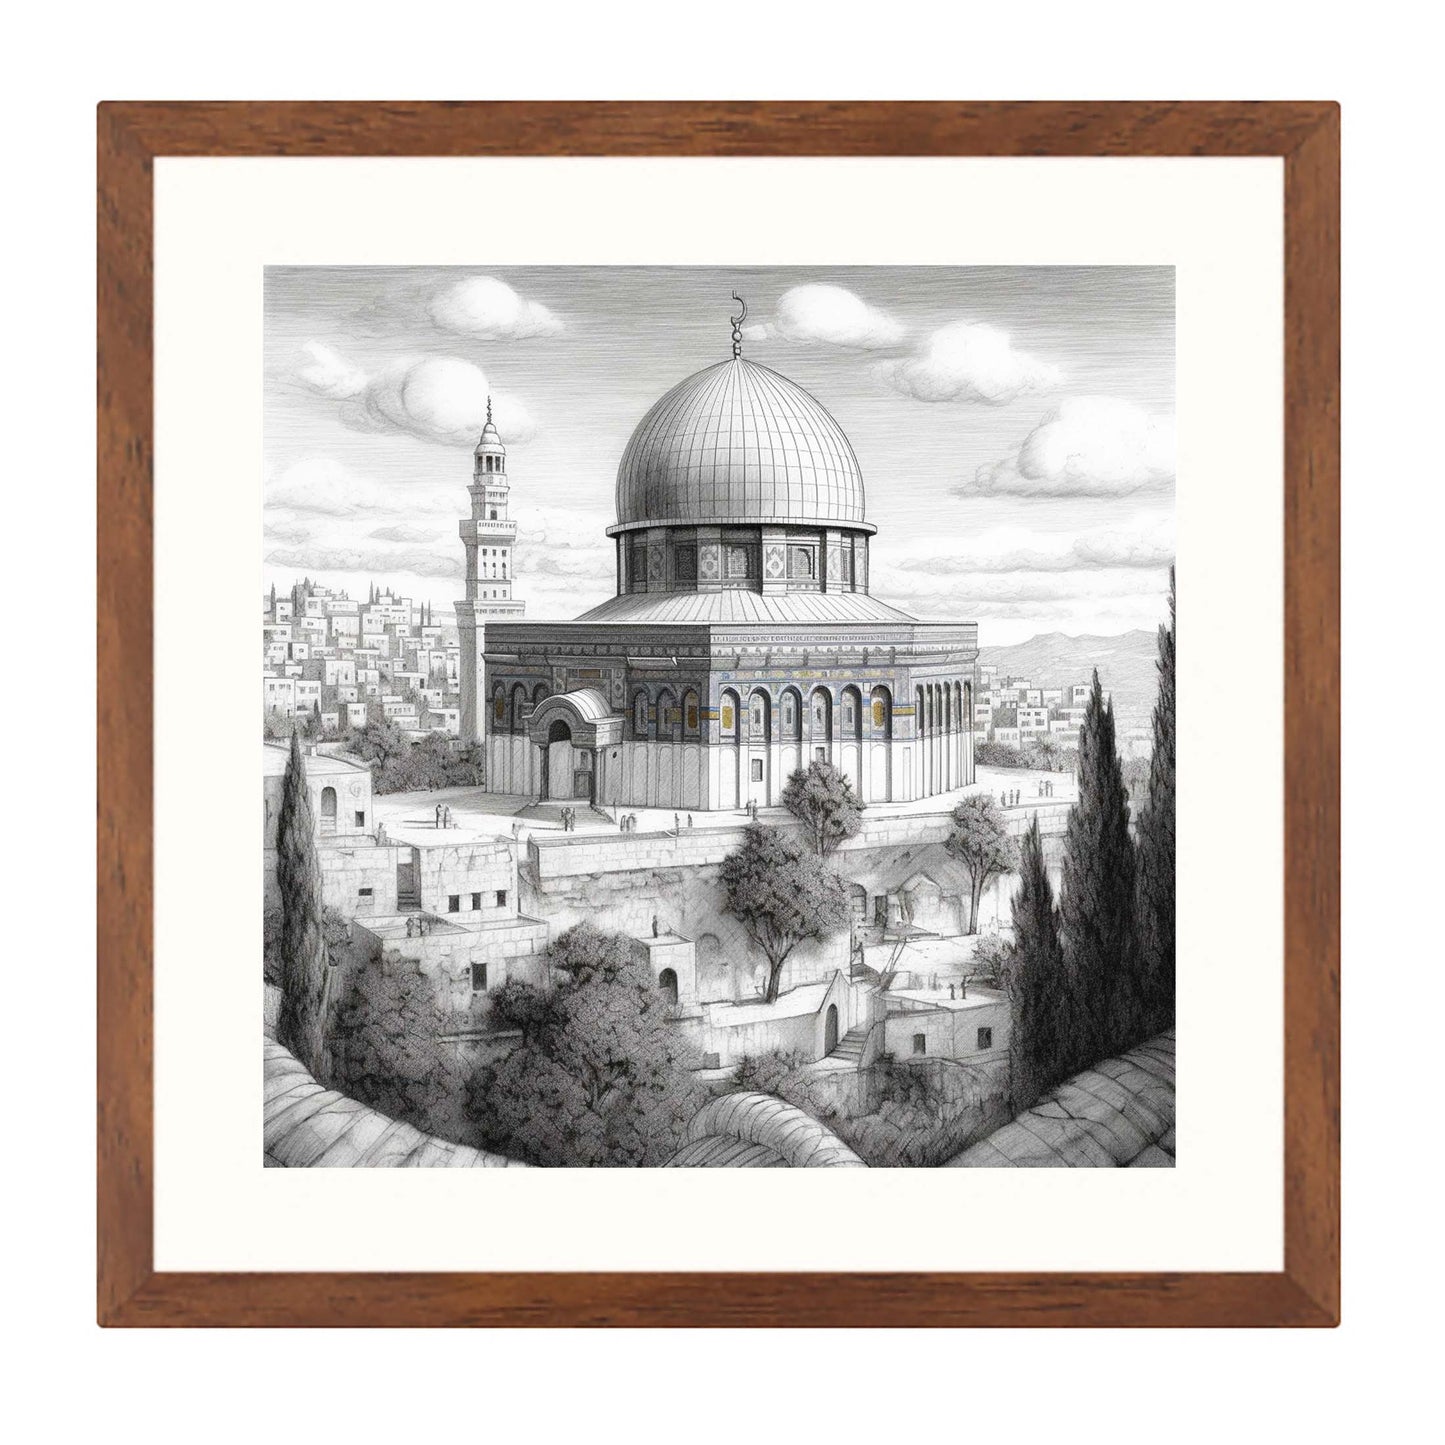 Jerusalem Dome of the Rock - mural in the style of a drawing